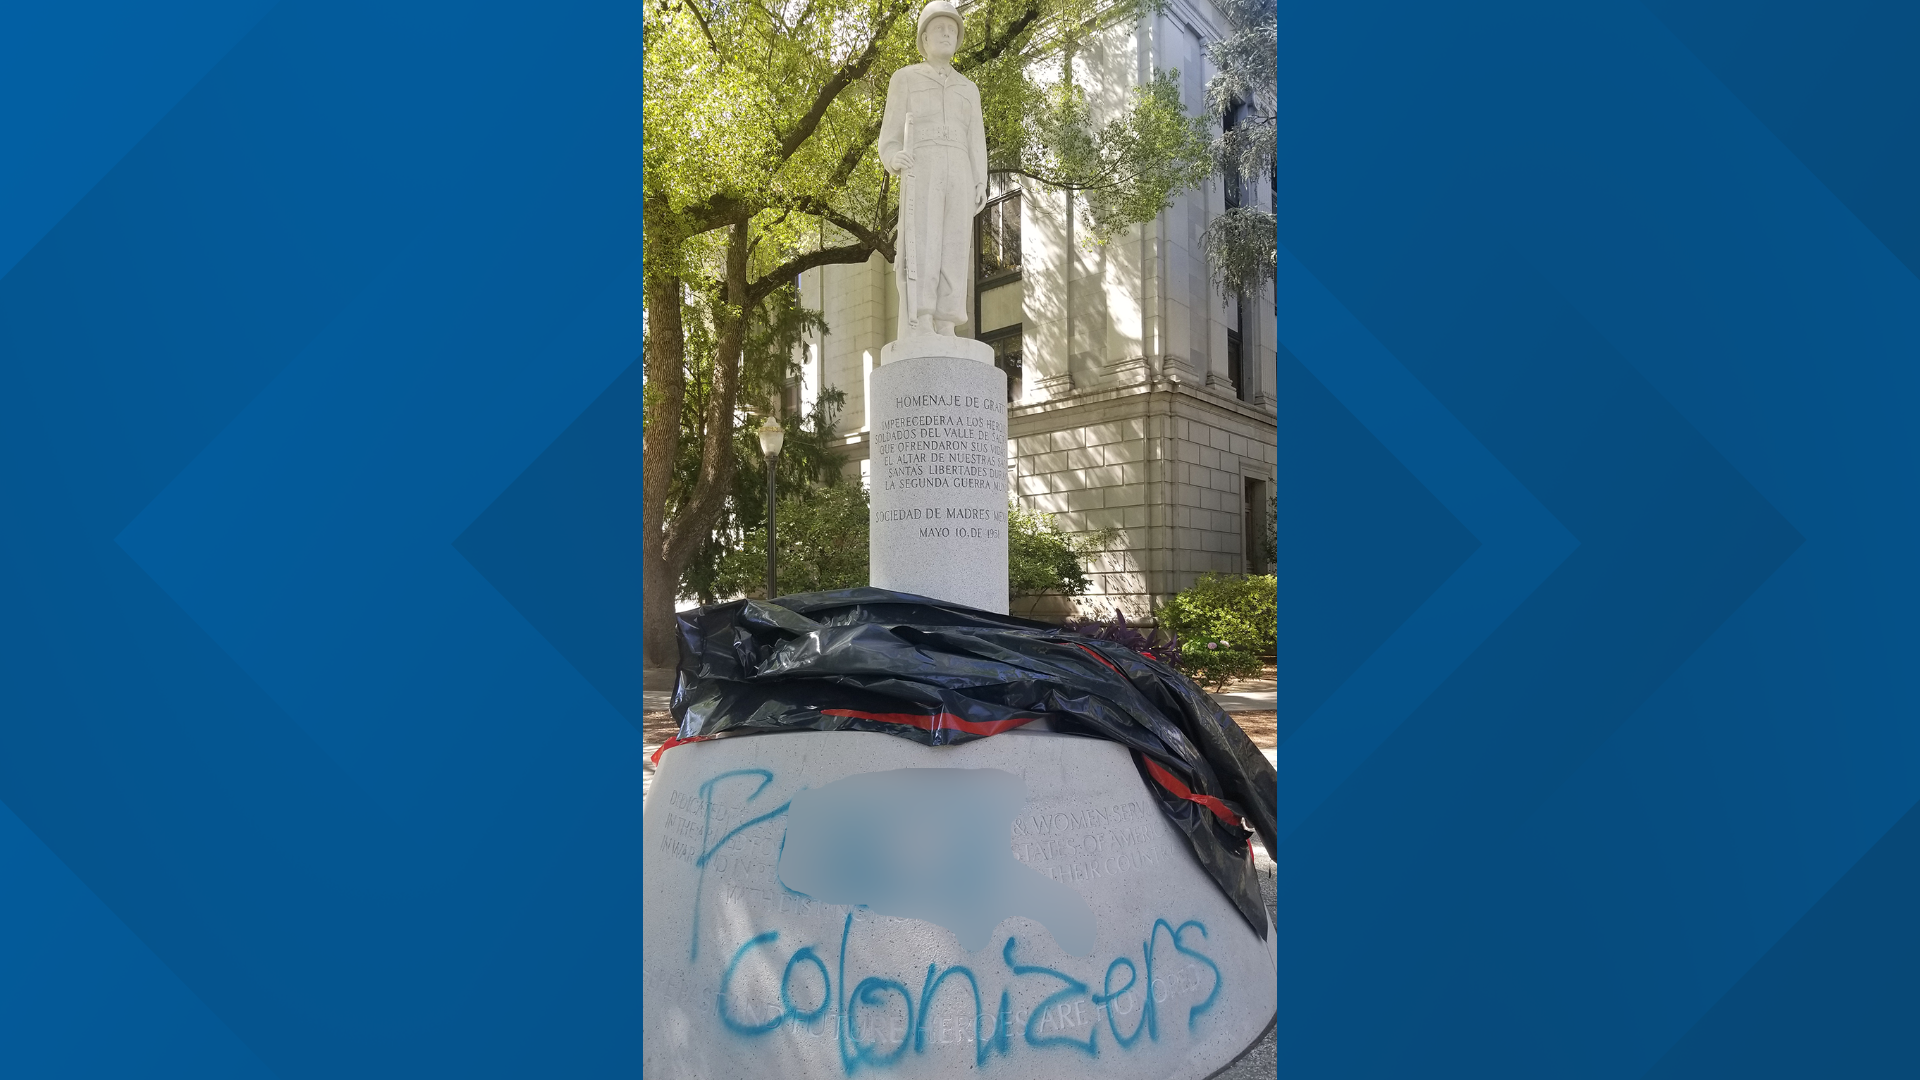 The vandalism of the 'El Soldado' monument allegedly happened the same weekend that protesters pulled down the statue of Father Junipero Serra.